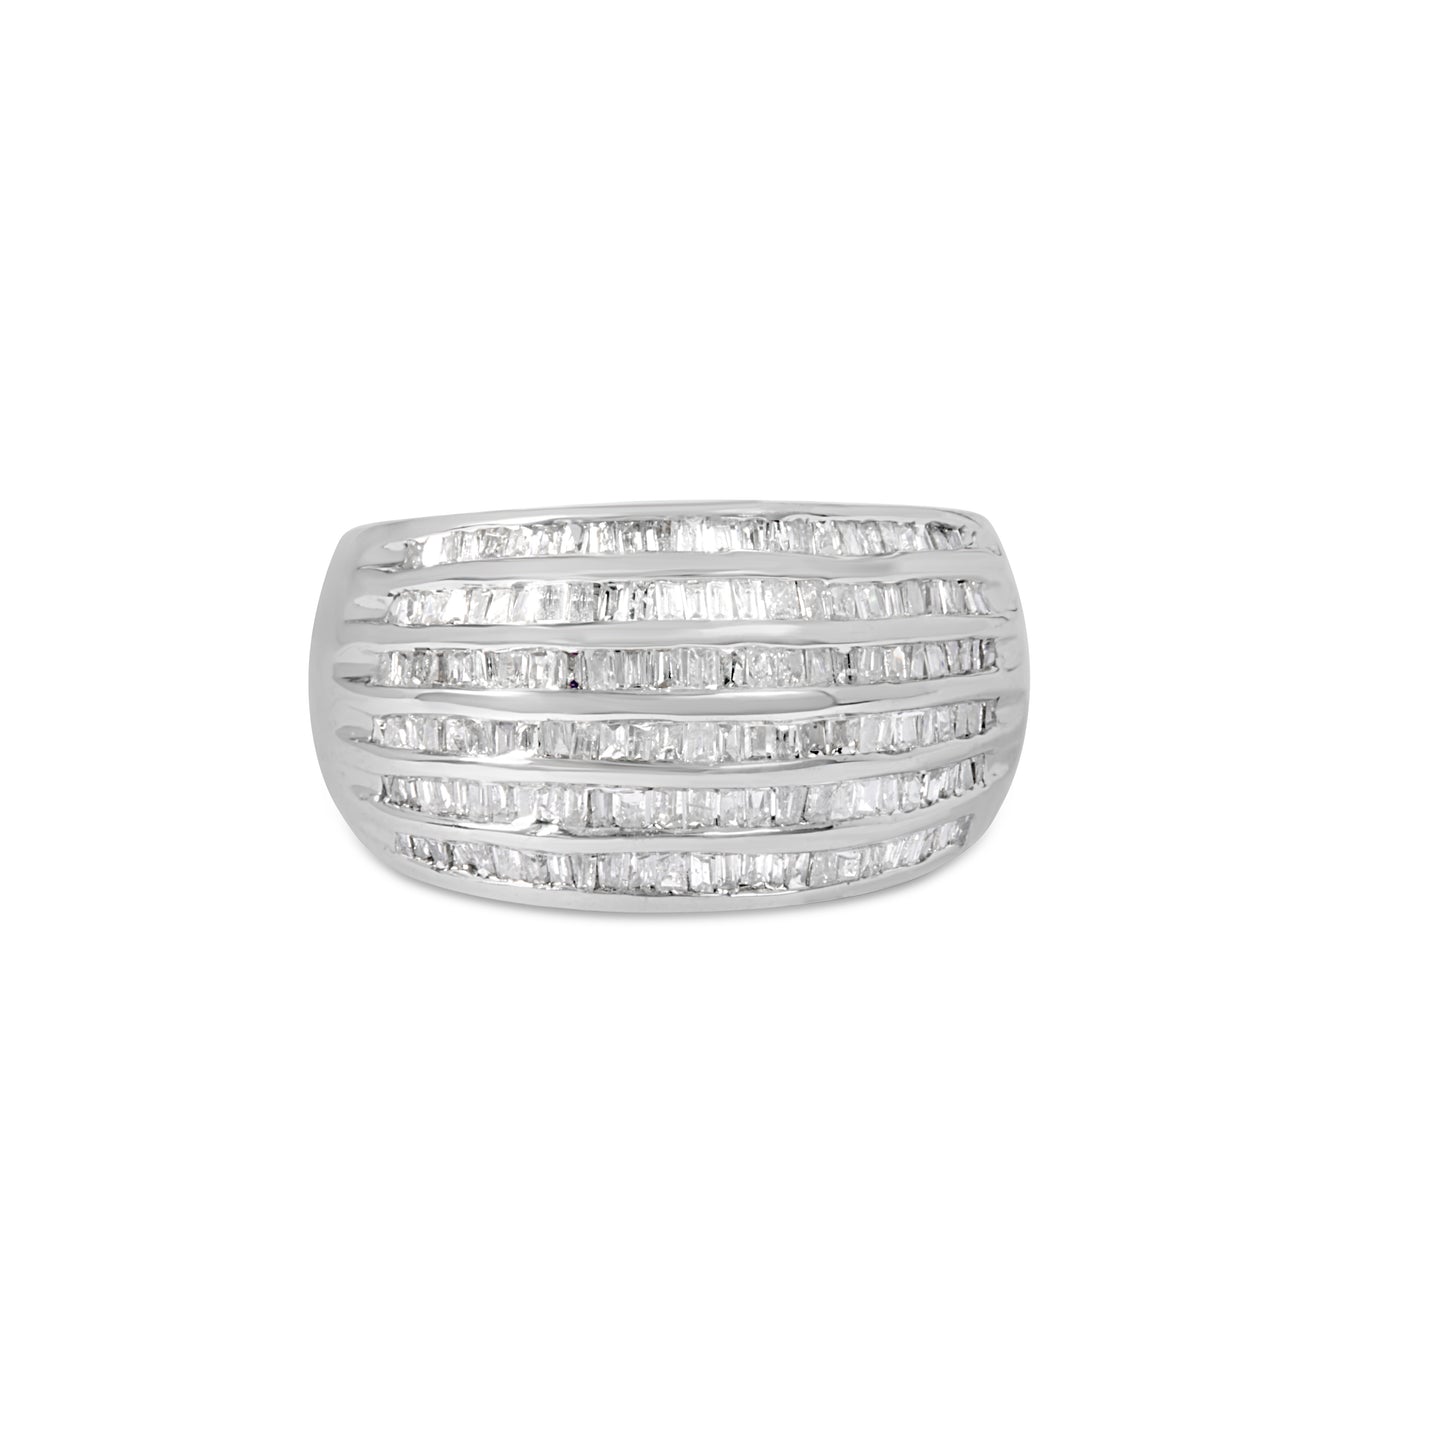 1.00 cttw Baguette-Cut Diamond 6-Row Channel Set Domed Tapered Cocktail Fashion Ring in Sterling Silver